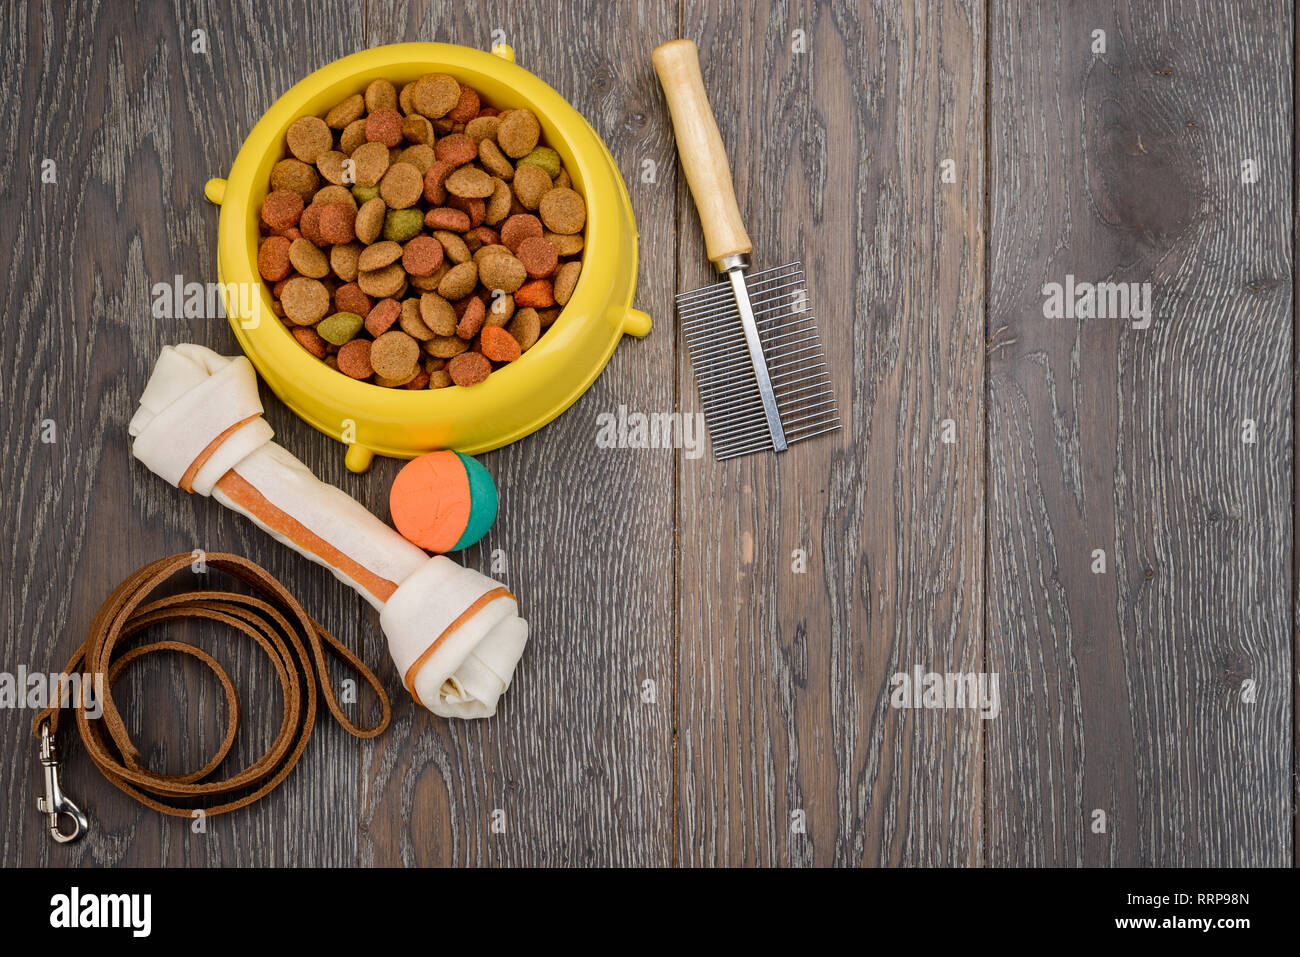 Leash, toys, food and brush Stock Photo